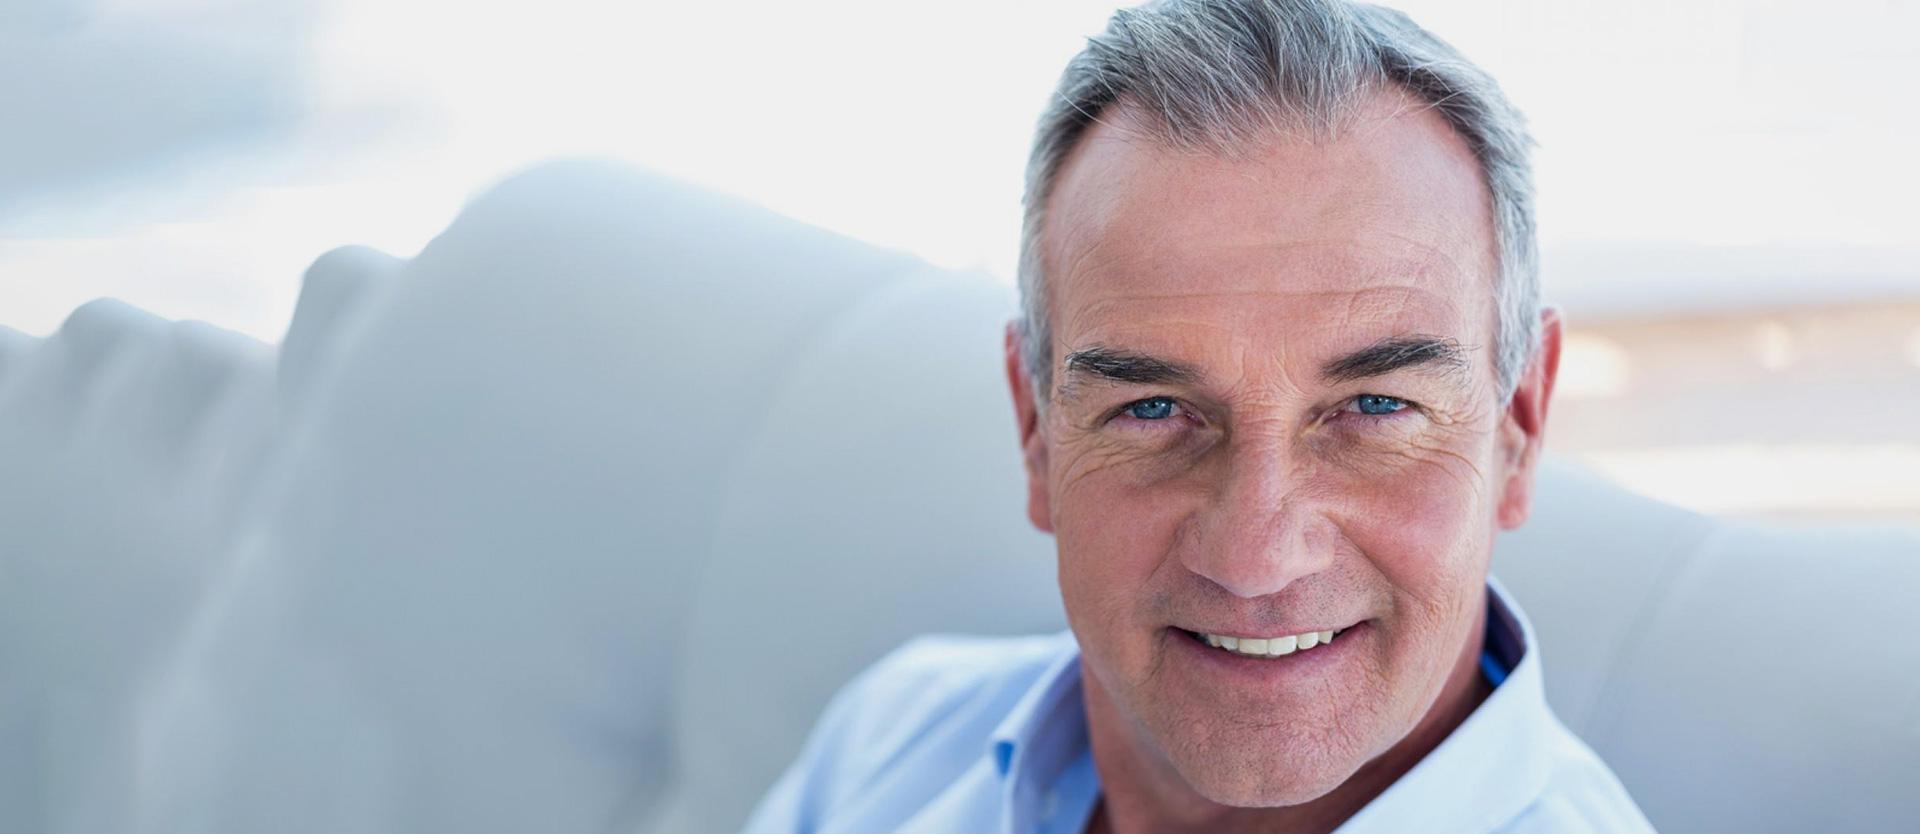 Are Premature Graying and Hair Loss Related?